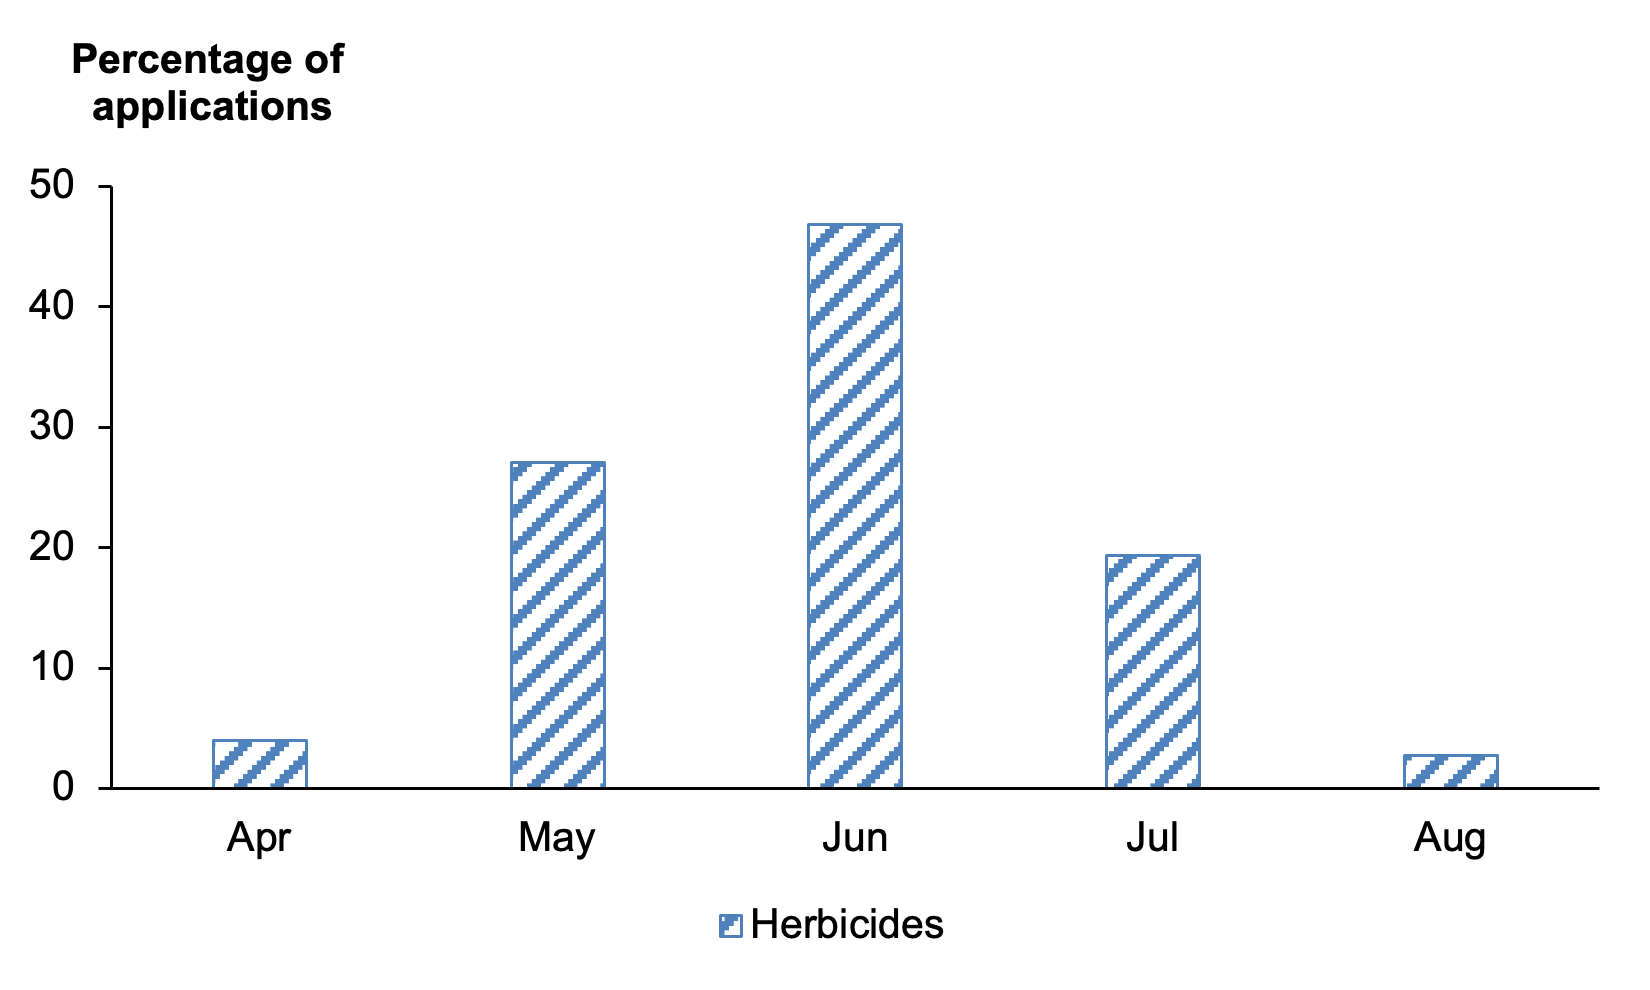 Bar chart of percentage of pesticide applications (all herbicides) on grass one to four years old by month where most applications are in June 2021.